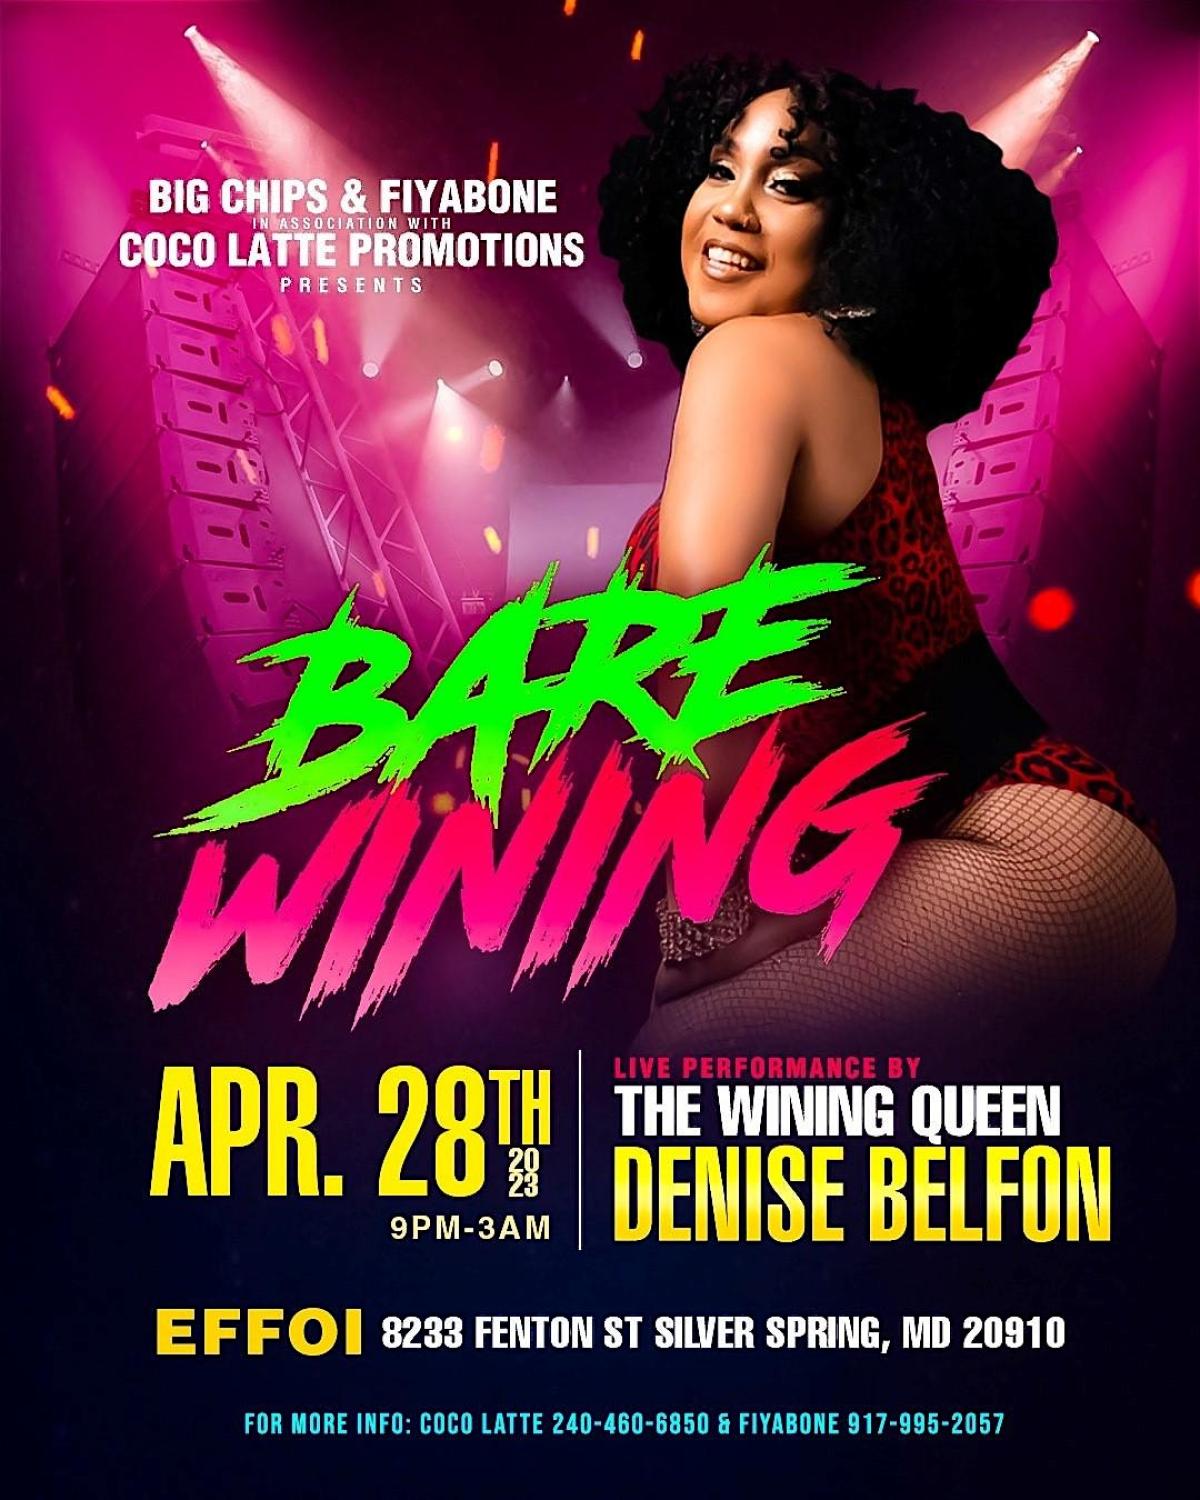 Bare Wining flyer or graphic.